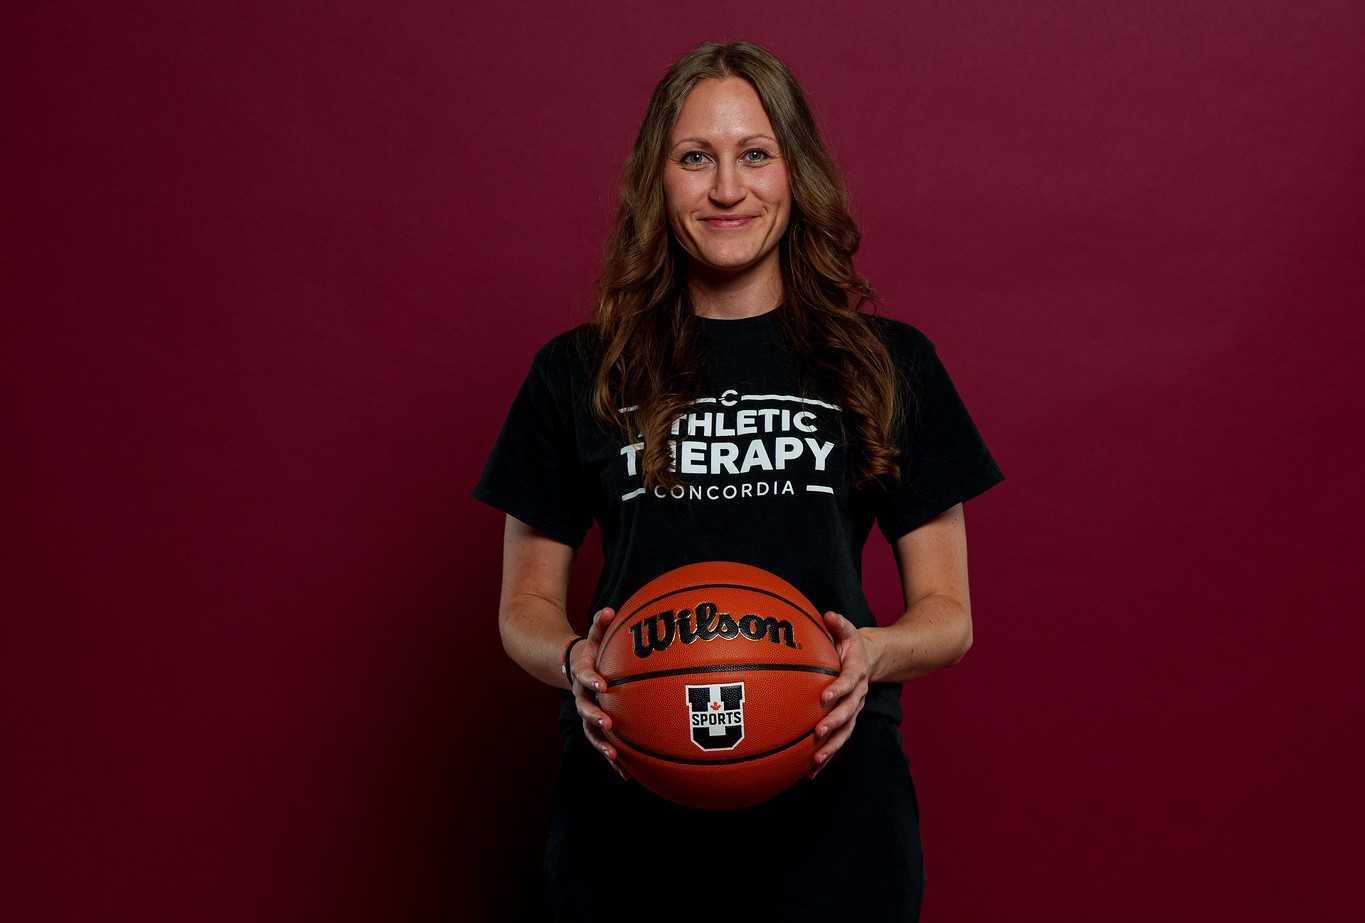 Meagan Anstruther wears a black t-shirt and holds a basketball